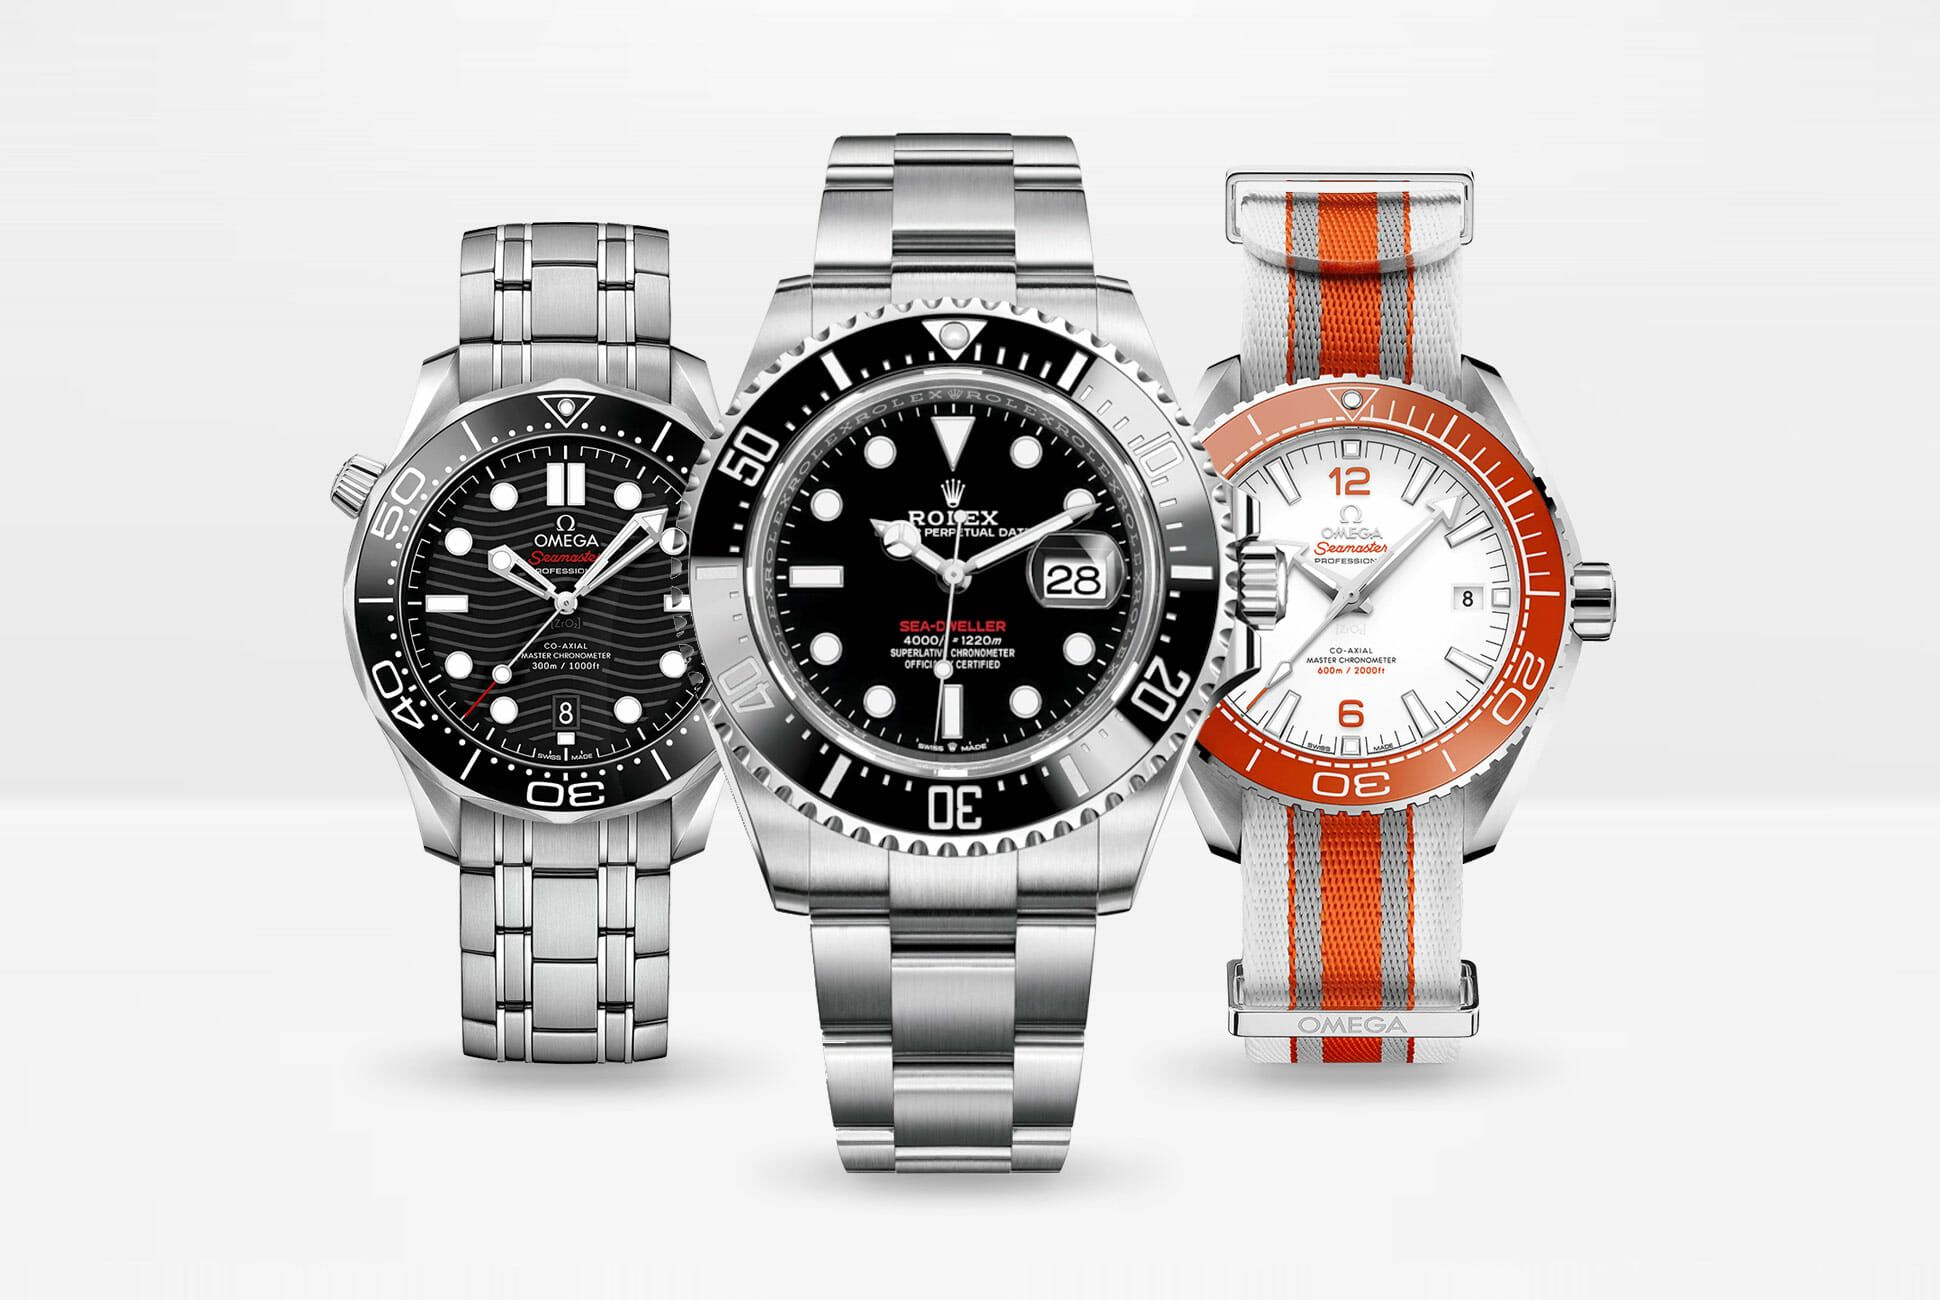 5 Dive Watches Worn By Professional Saturation Divers